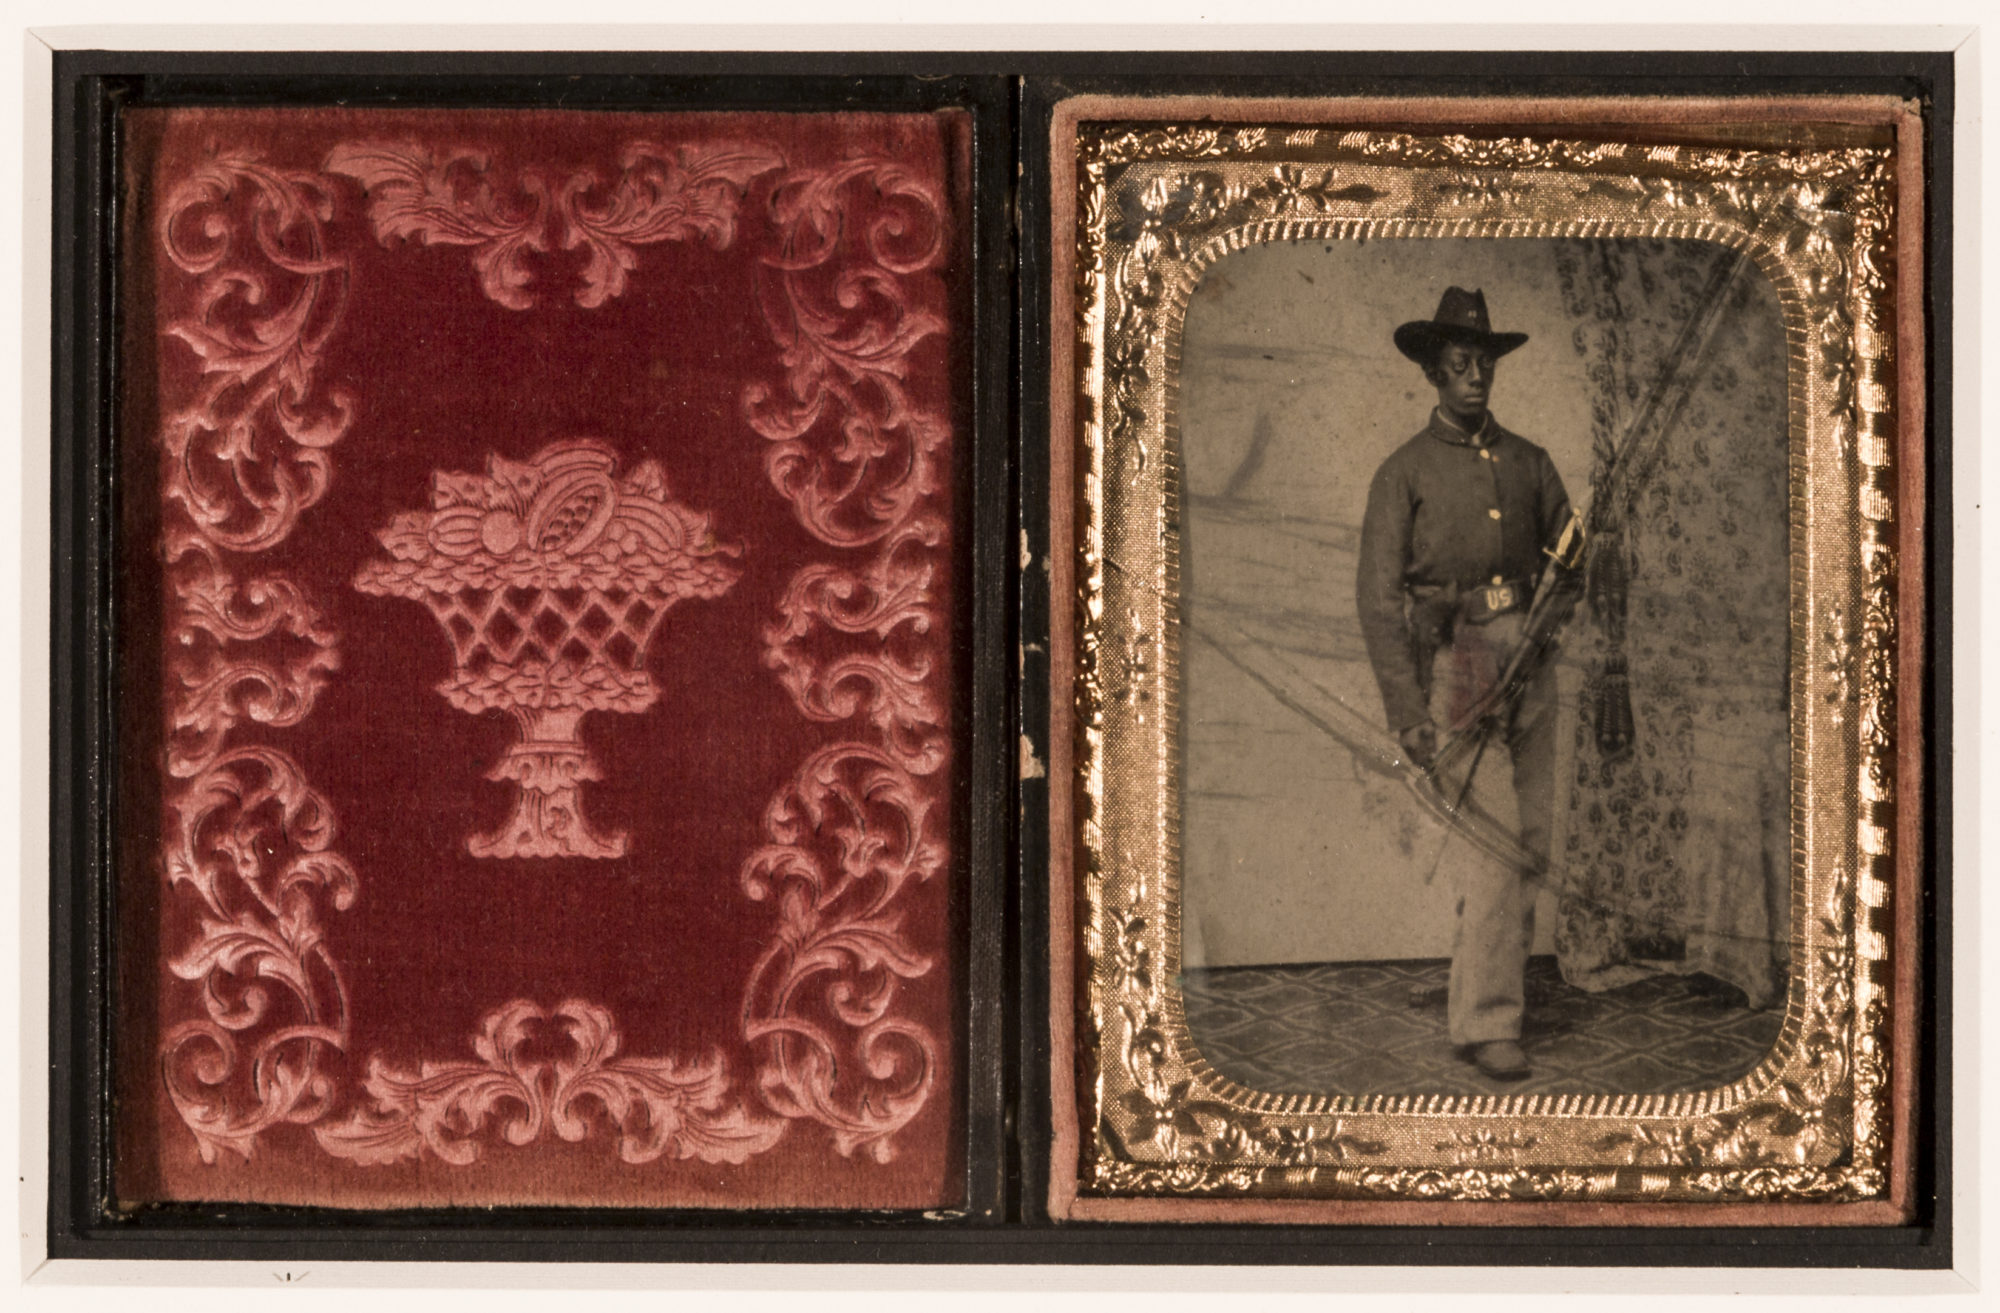 Diptych with a red design on the left and a gold-framed sepia photo of a man in military uniform on the right.